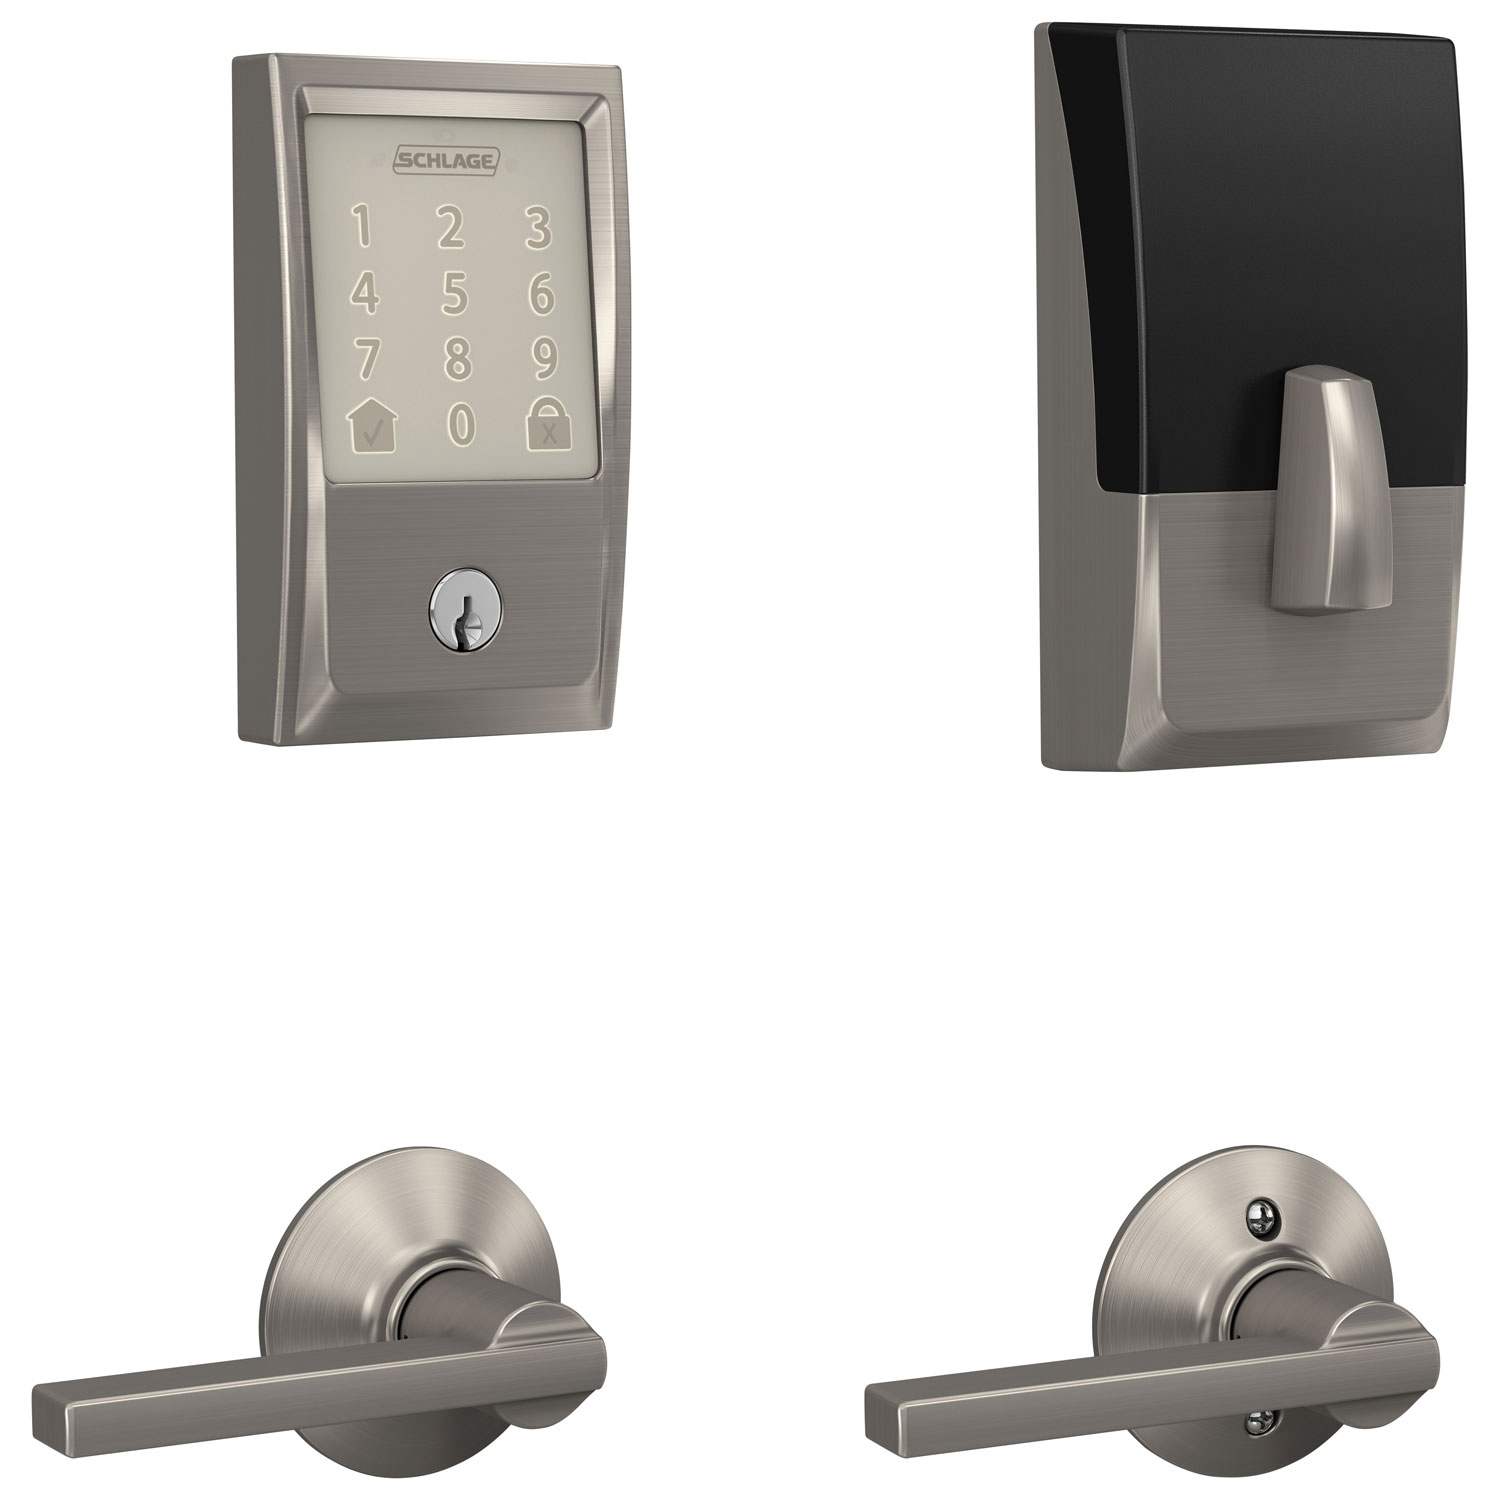 Encode Satin Nickel Electronic Smart WiFi Keyless Entry Deadbolt Lock with  Century Trim Rated AAA